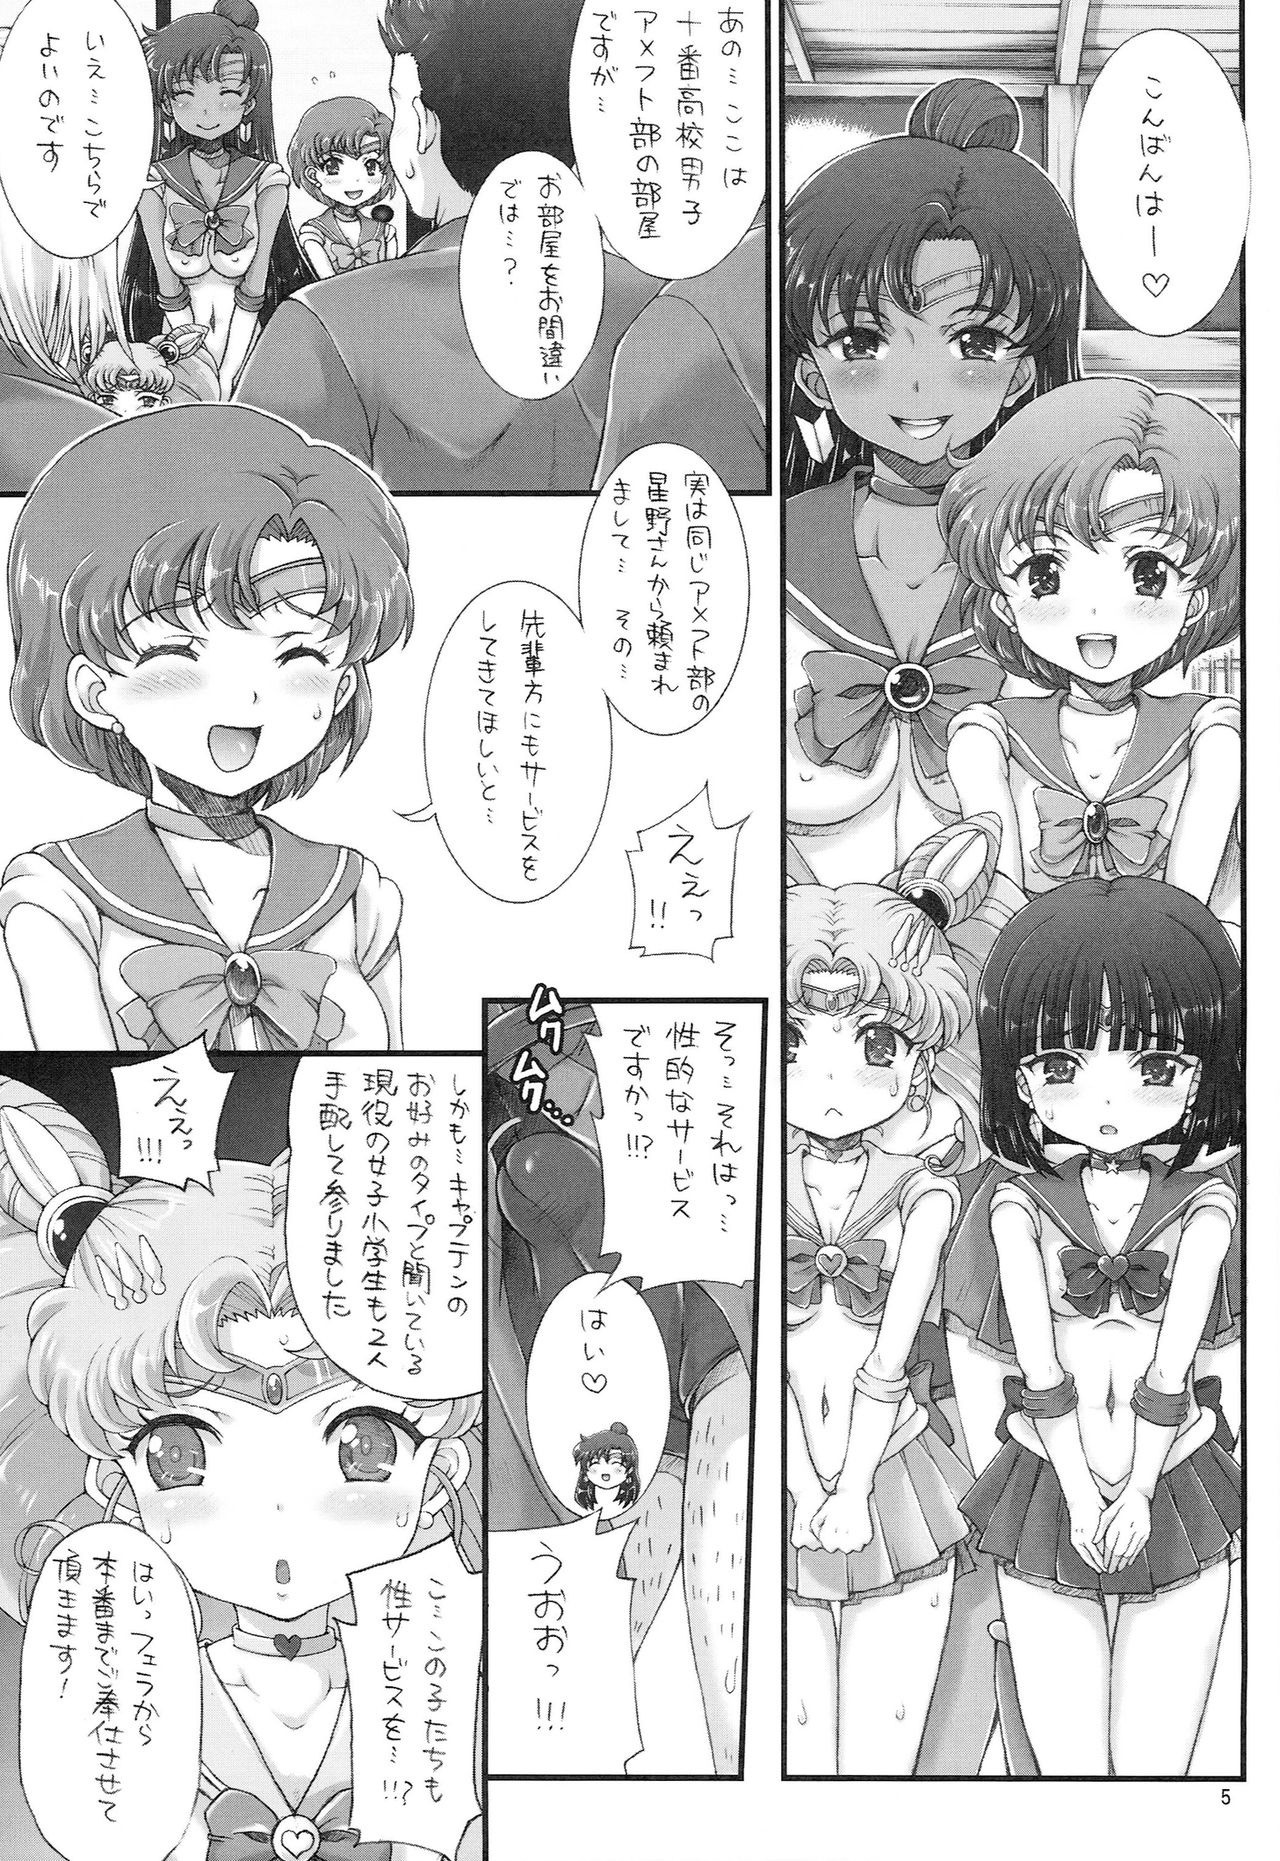 Sailor Delivery Health AS hentai manga picture 4